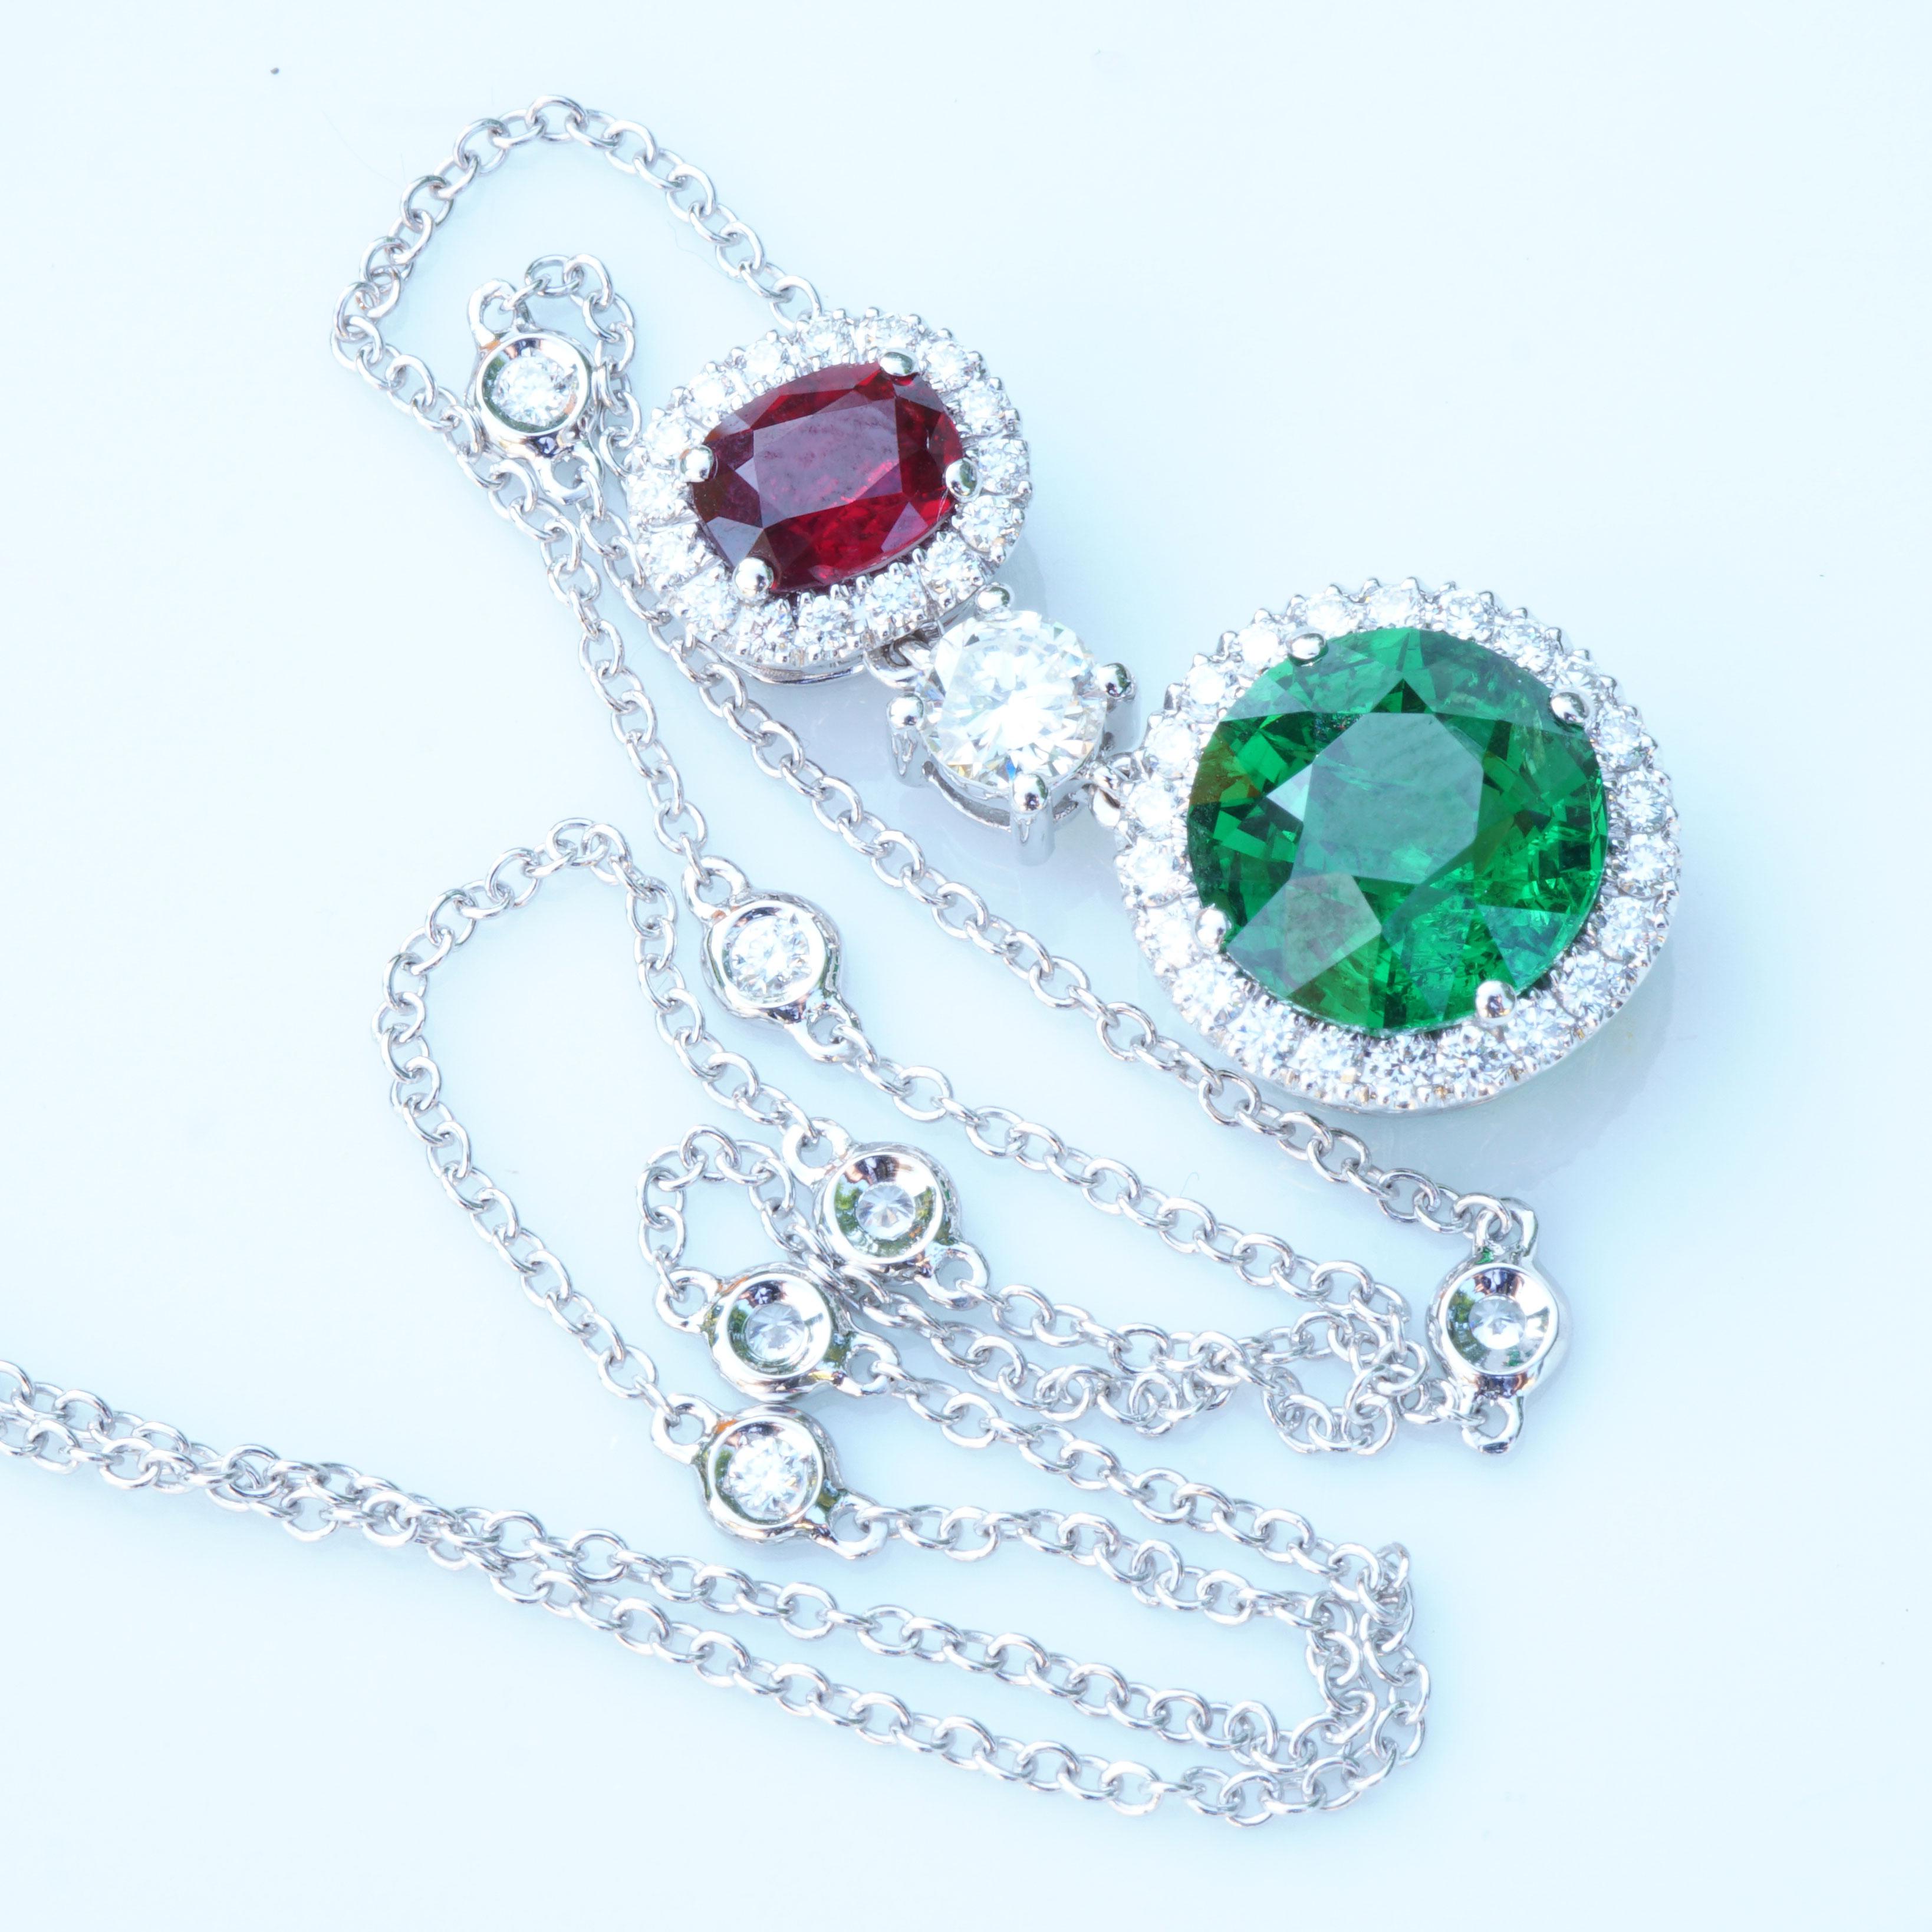 tricolore....a color like bella italia, inspired me to create this magnific necklace, made in a traditional goldsmith's factory in Valenza/Italy, hallmarked with the Schmuckzicke logo,

... this beautiful, great untreated tsavorite (green garnet) of